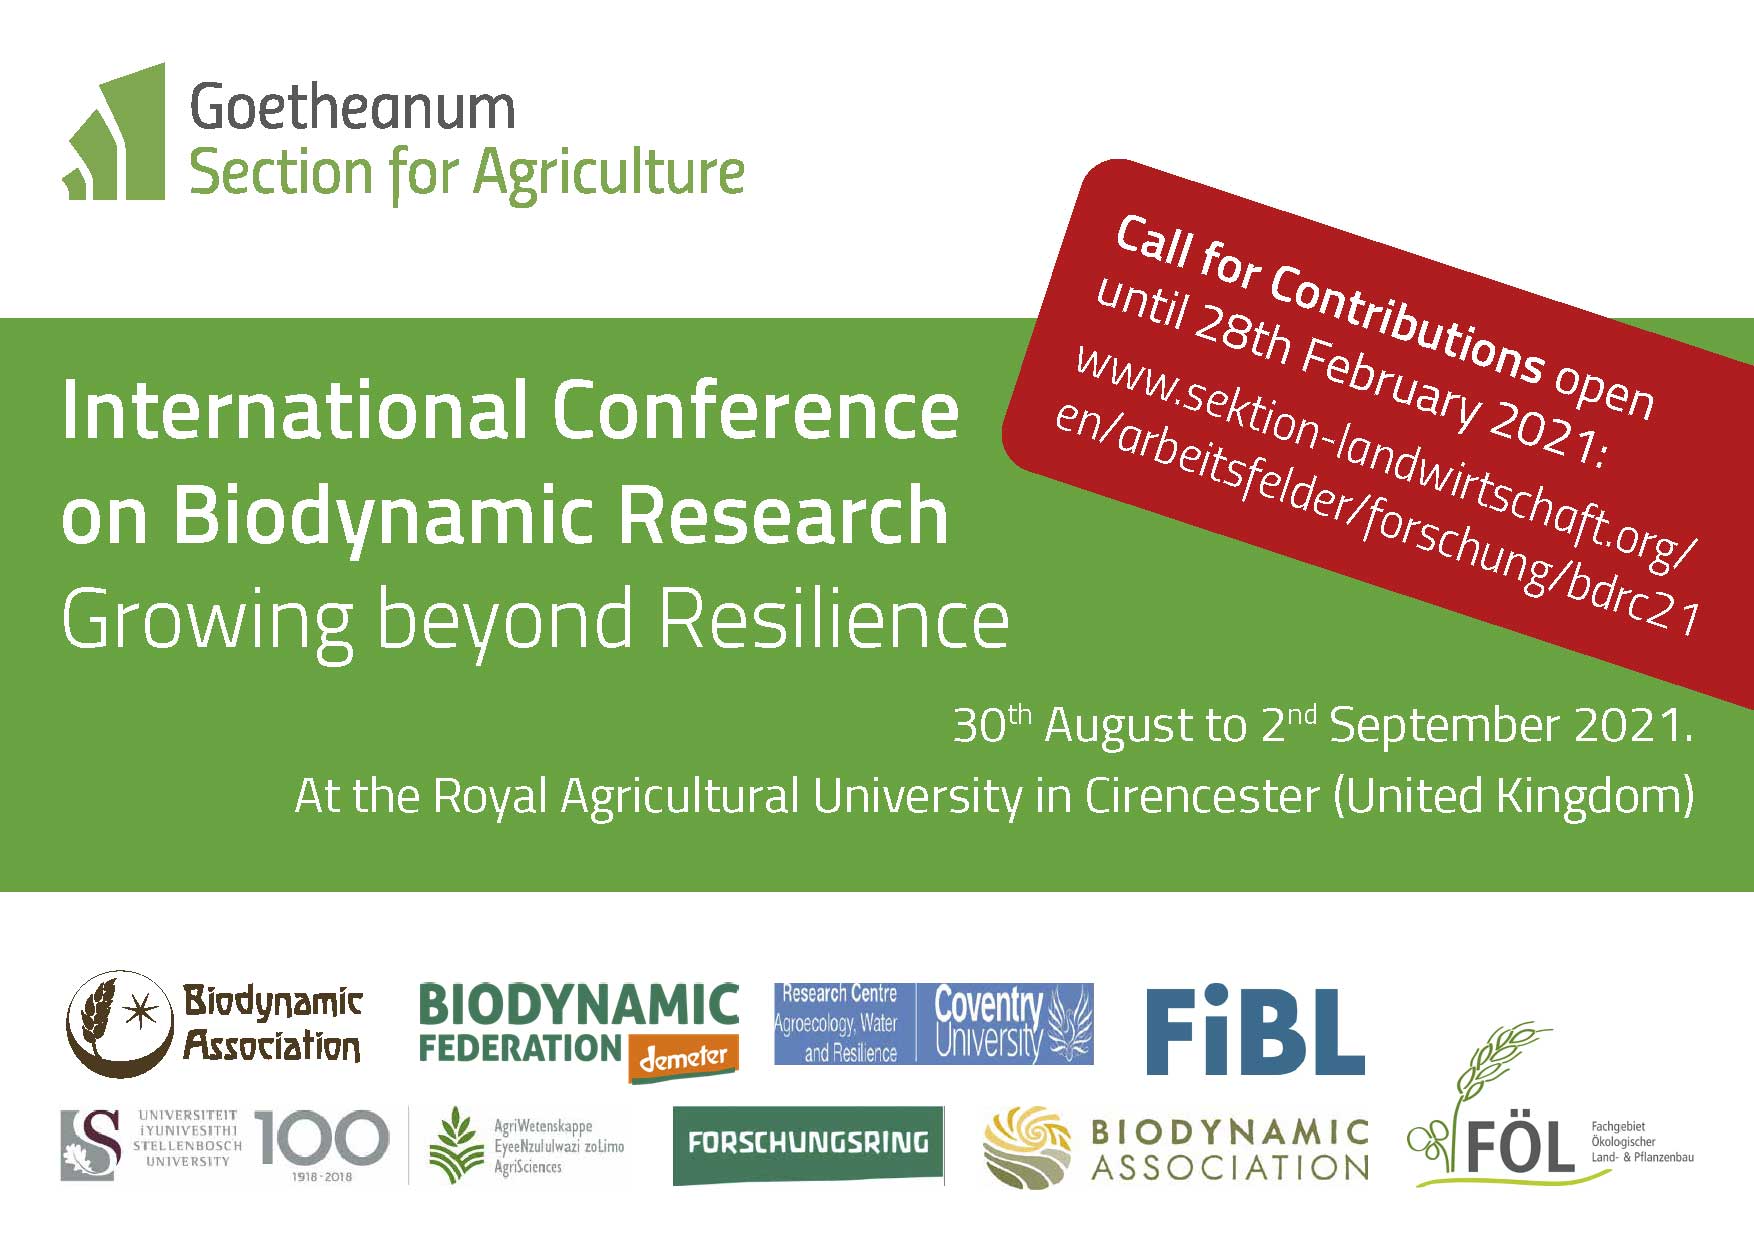 Call for Contributions – International Conference on Biodynamic Research: Growing beyond Resilience (Deadline: 28th February 2021)